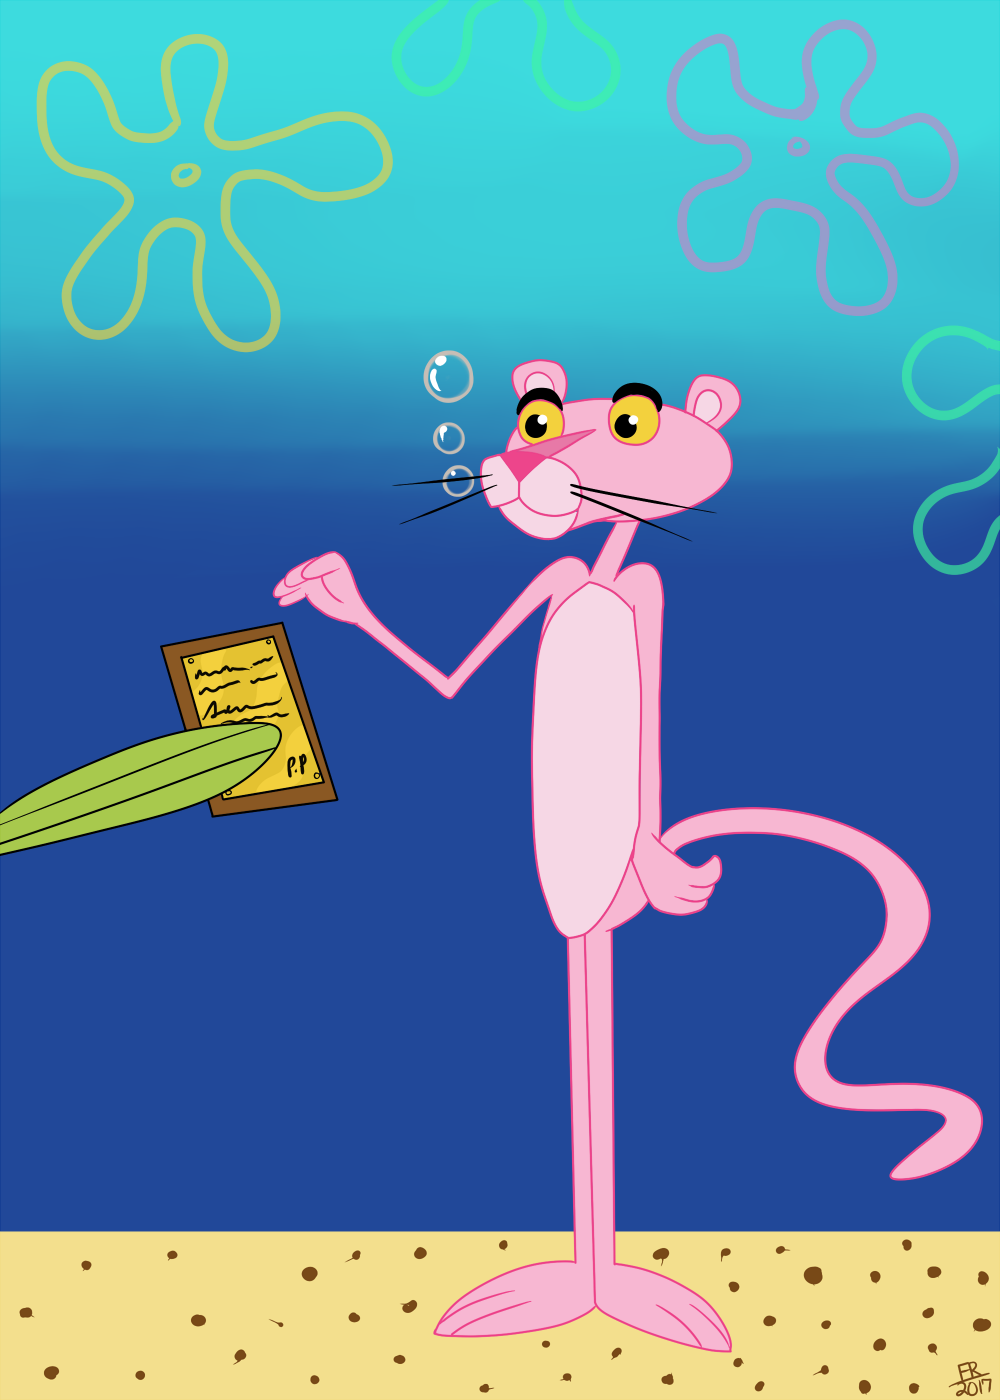 Pink Panther Working Out 1 (The Pink Panther, Fanart) by Lobogriff -- Fur  Affinity [dot] net